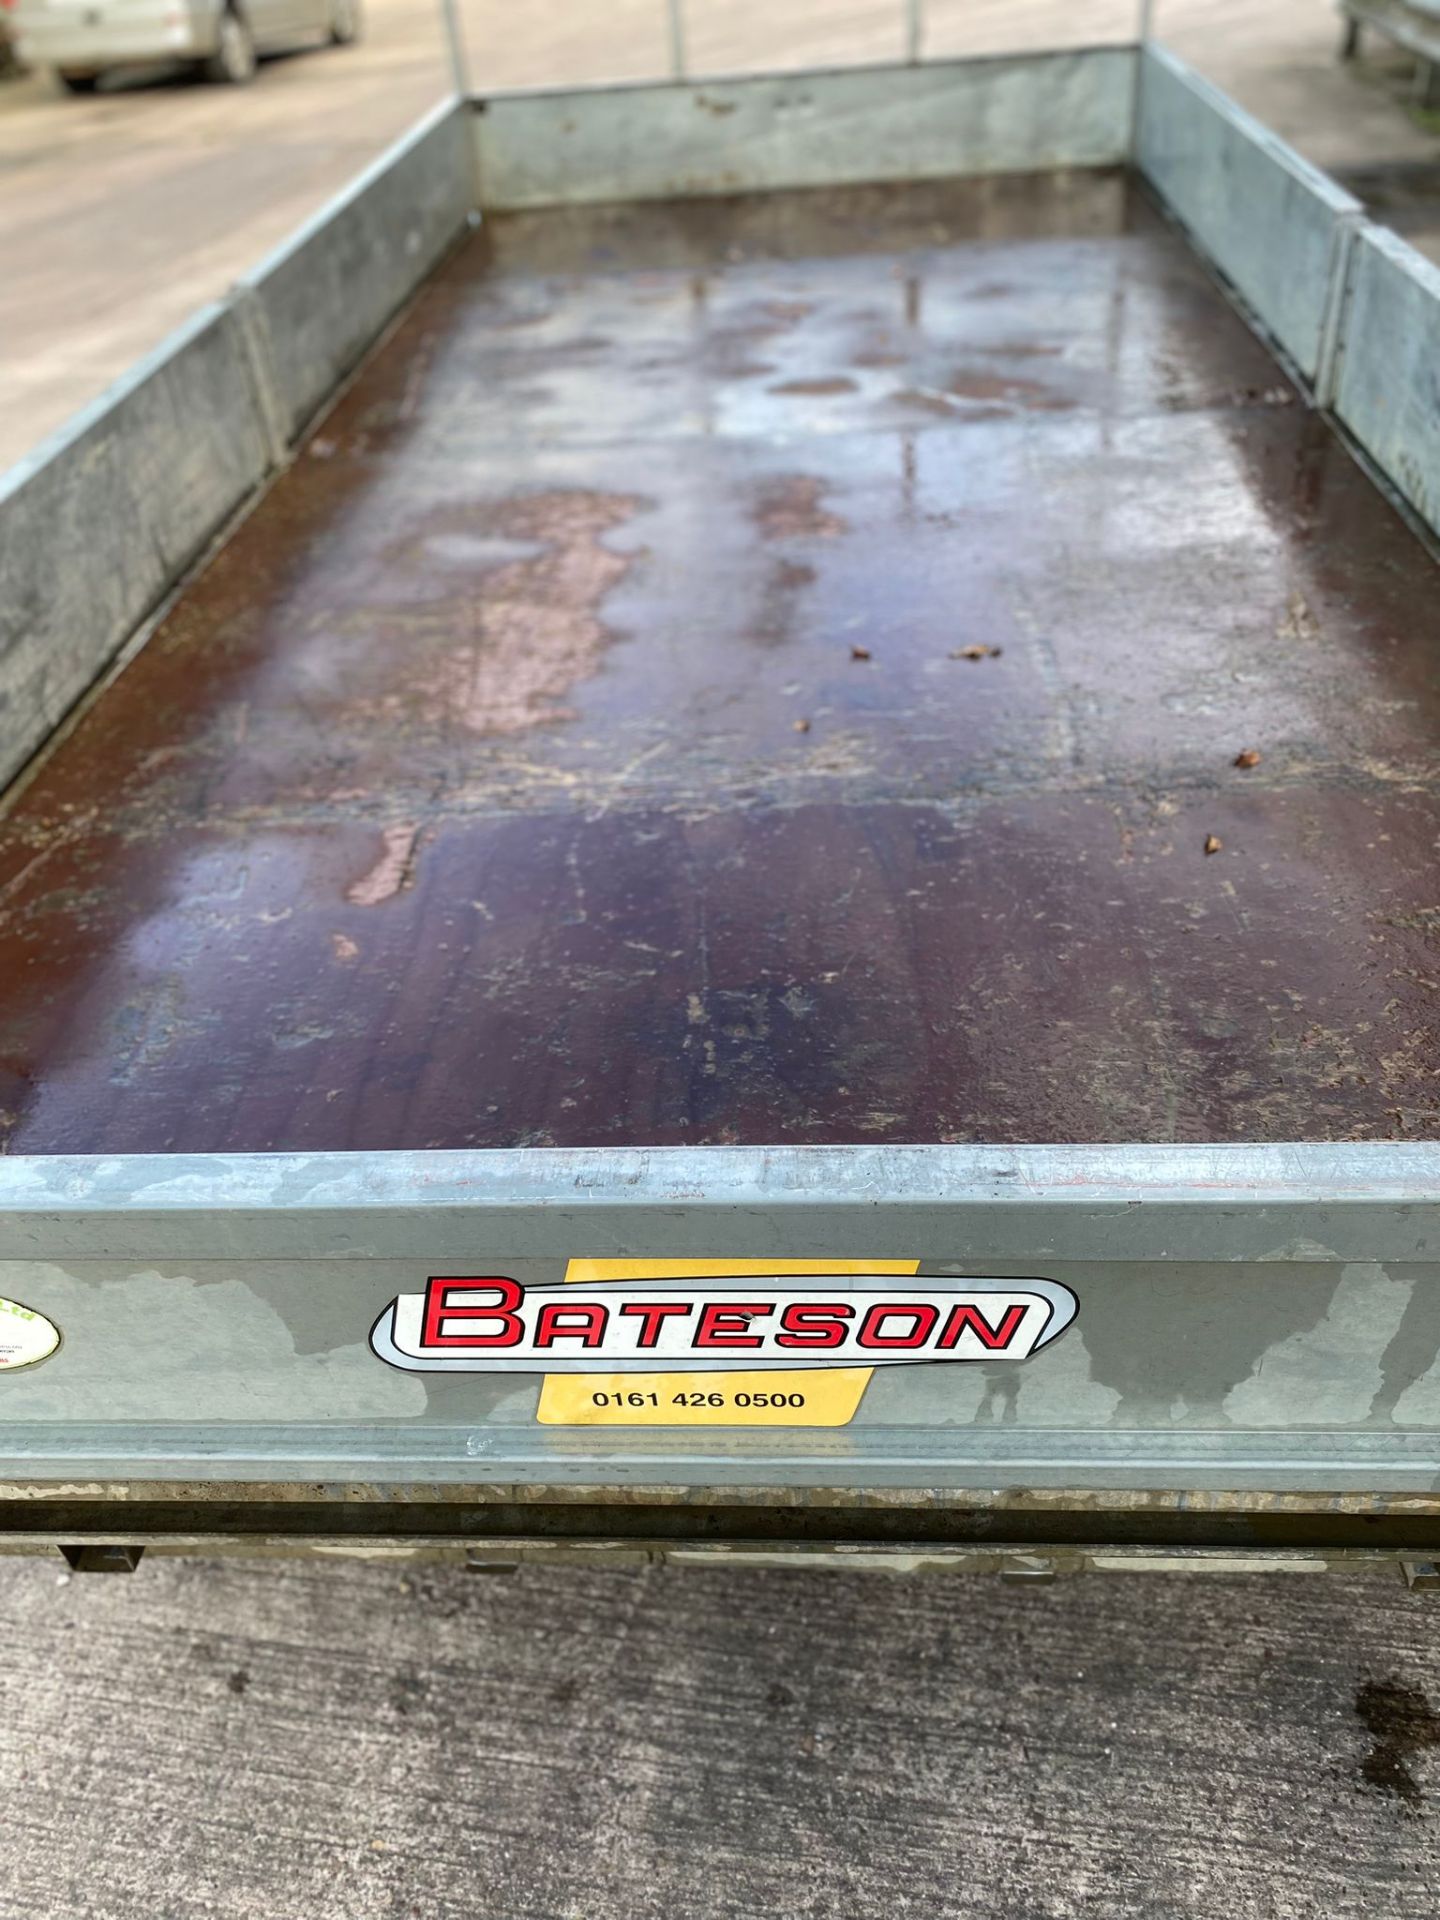 2007 BATESON TRAILER - IN VERY GOOD CONDITION WITH RAMPS, BRAKES ALL WORK, LIGHTS ALL WORK - Image 8 of 11